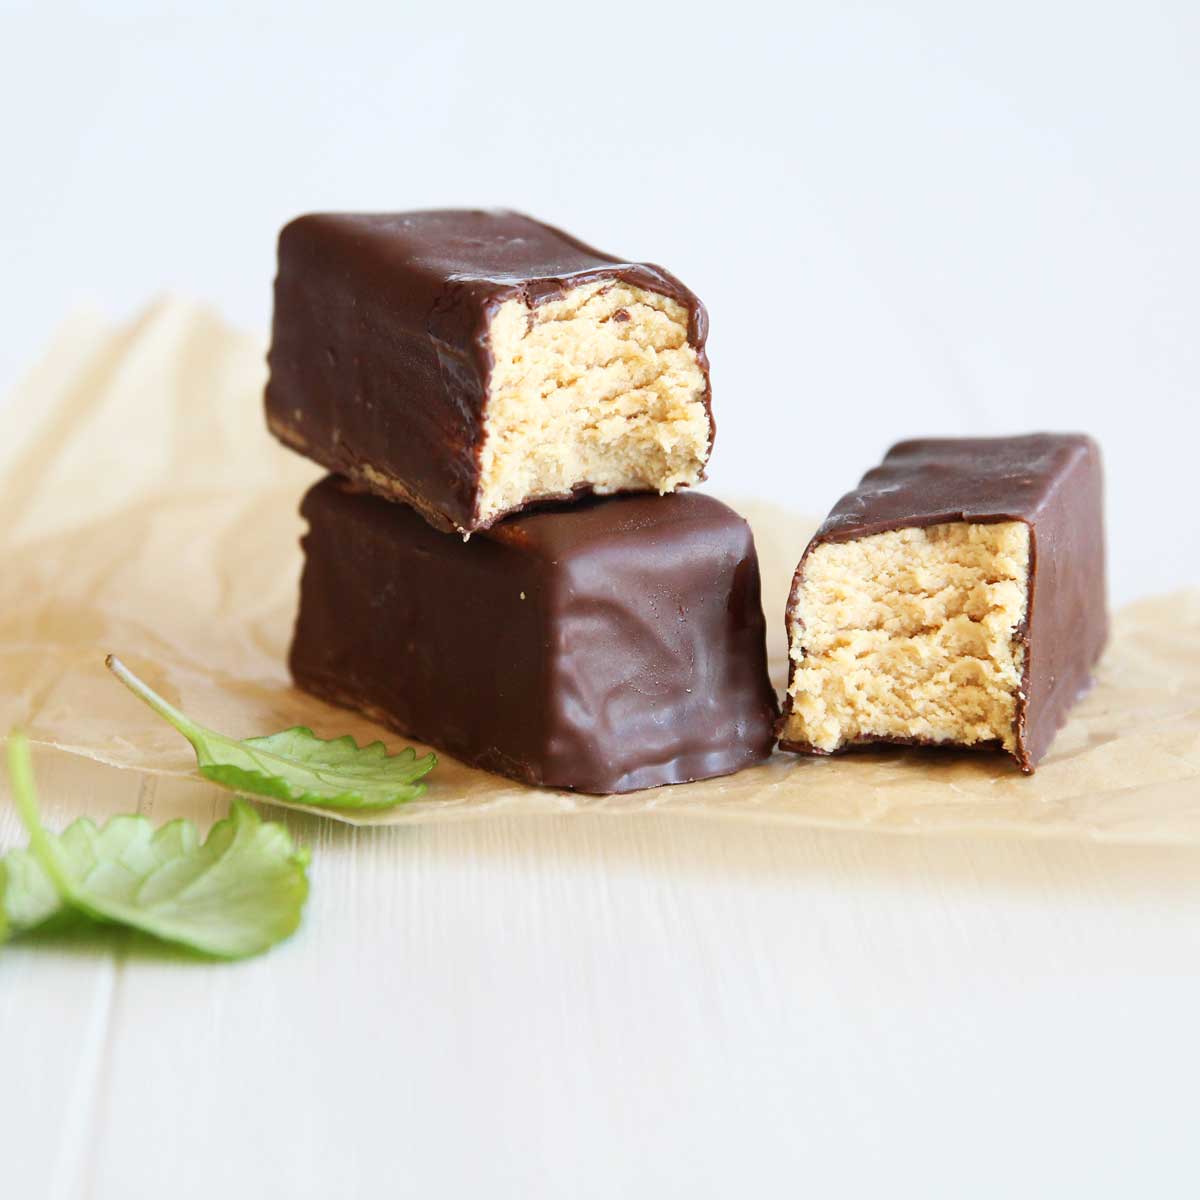 Simple Greek Yogurt Peanut Butter Protein Bars to eat for Breakfast or Post-Workout - Chocolate Protein Balls